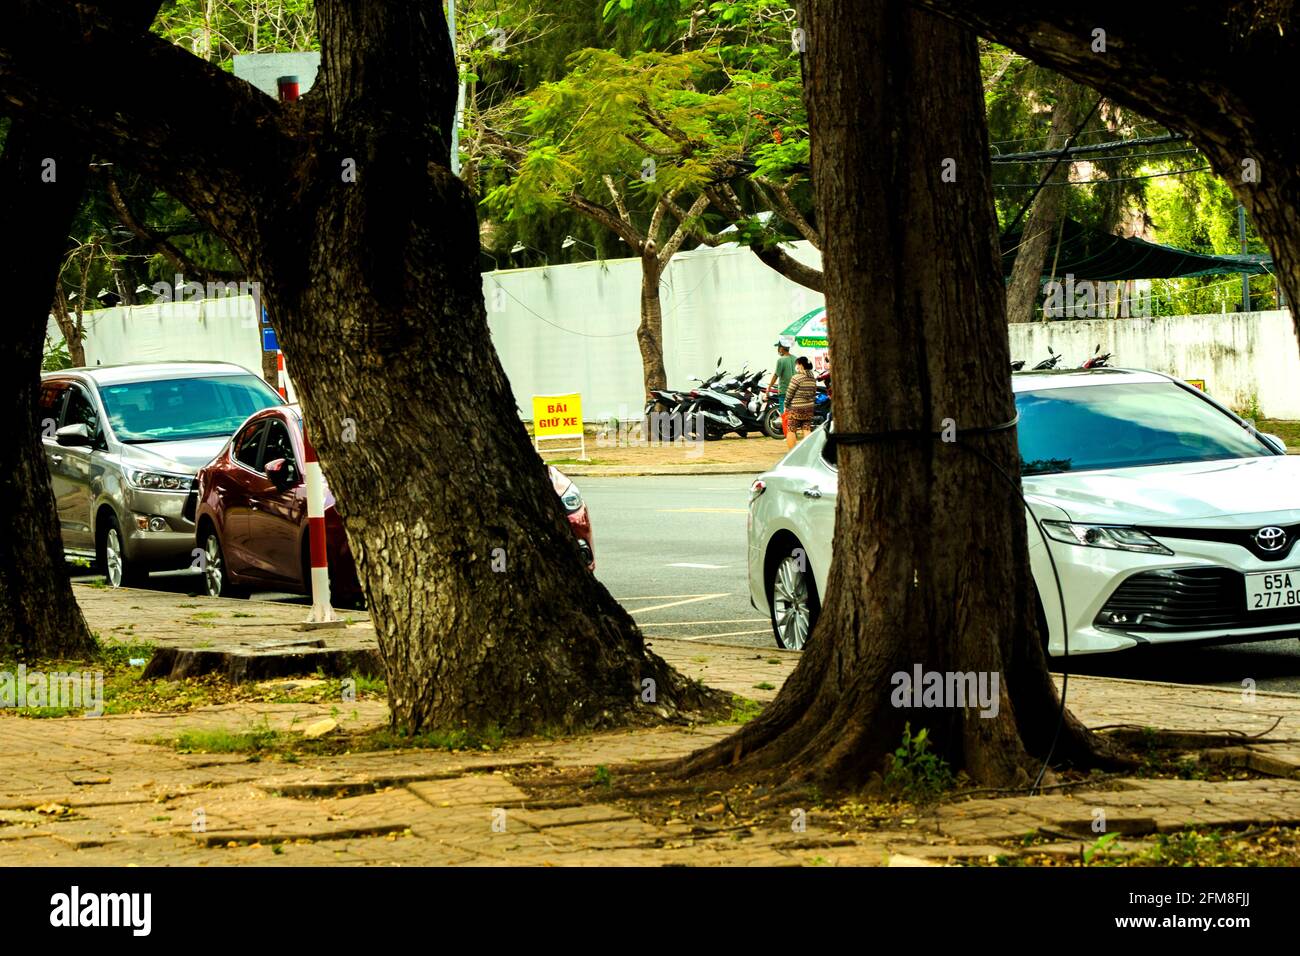 onside of street with cars and many people Stock Photo